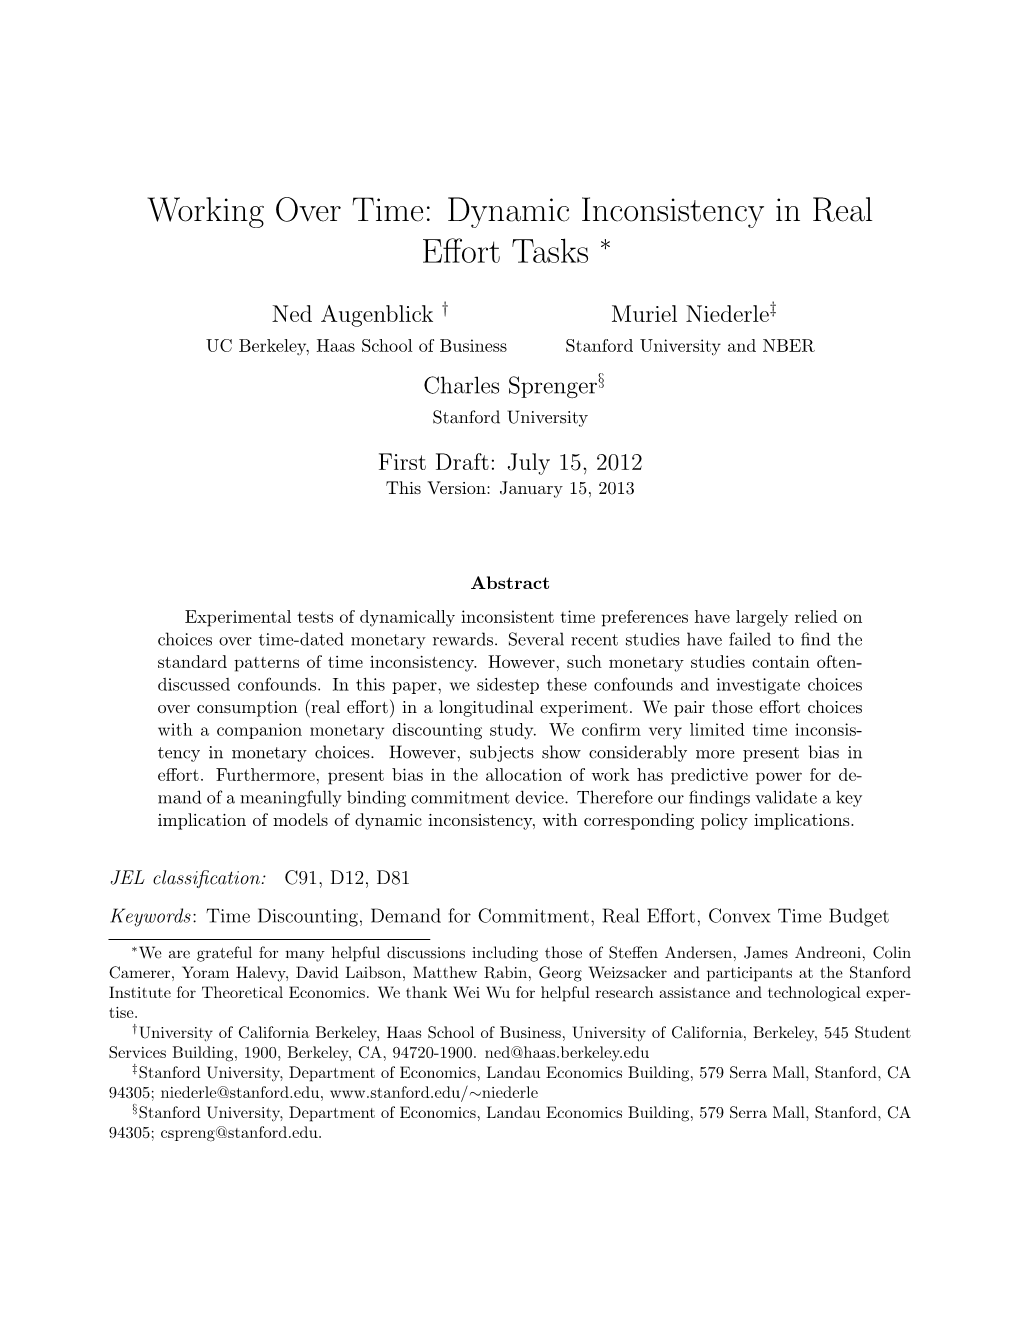 Working Over Time: Dynamic Inconsistency in Real E↵Ort Tasks ⇤